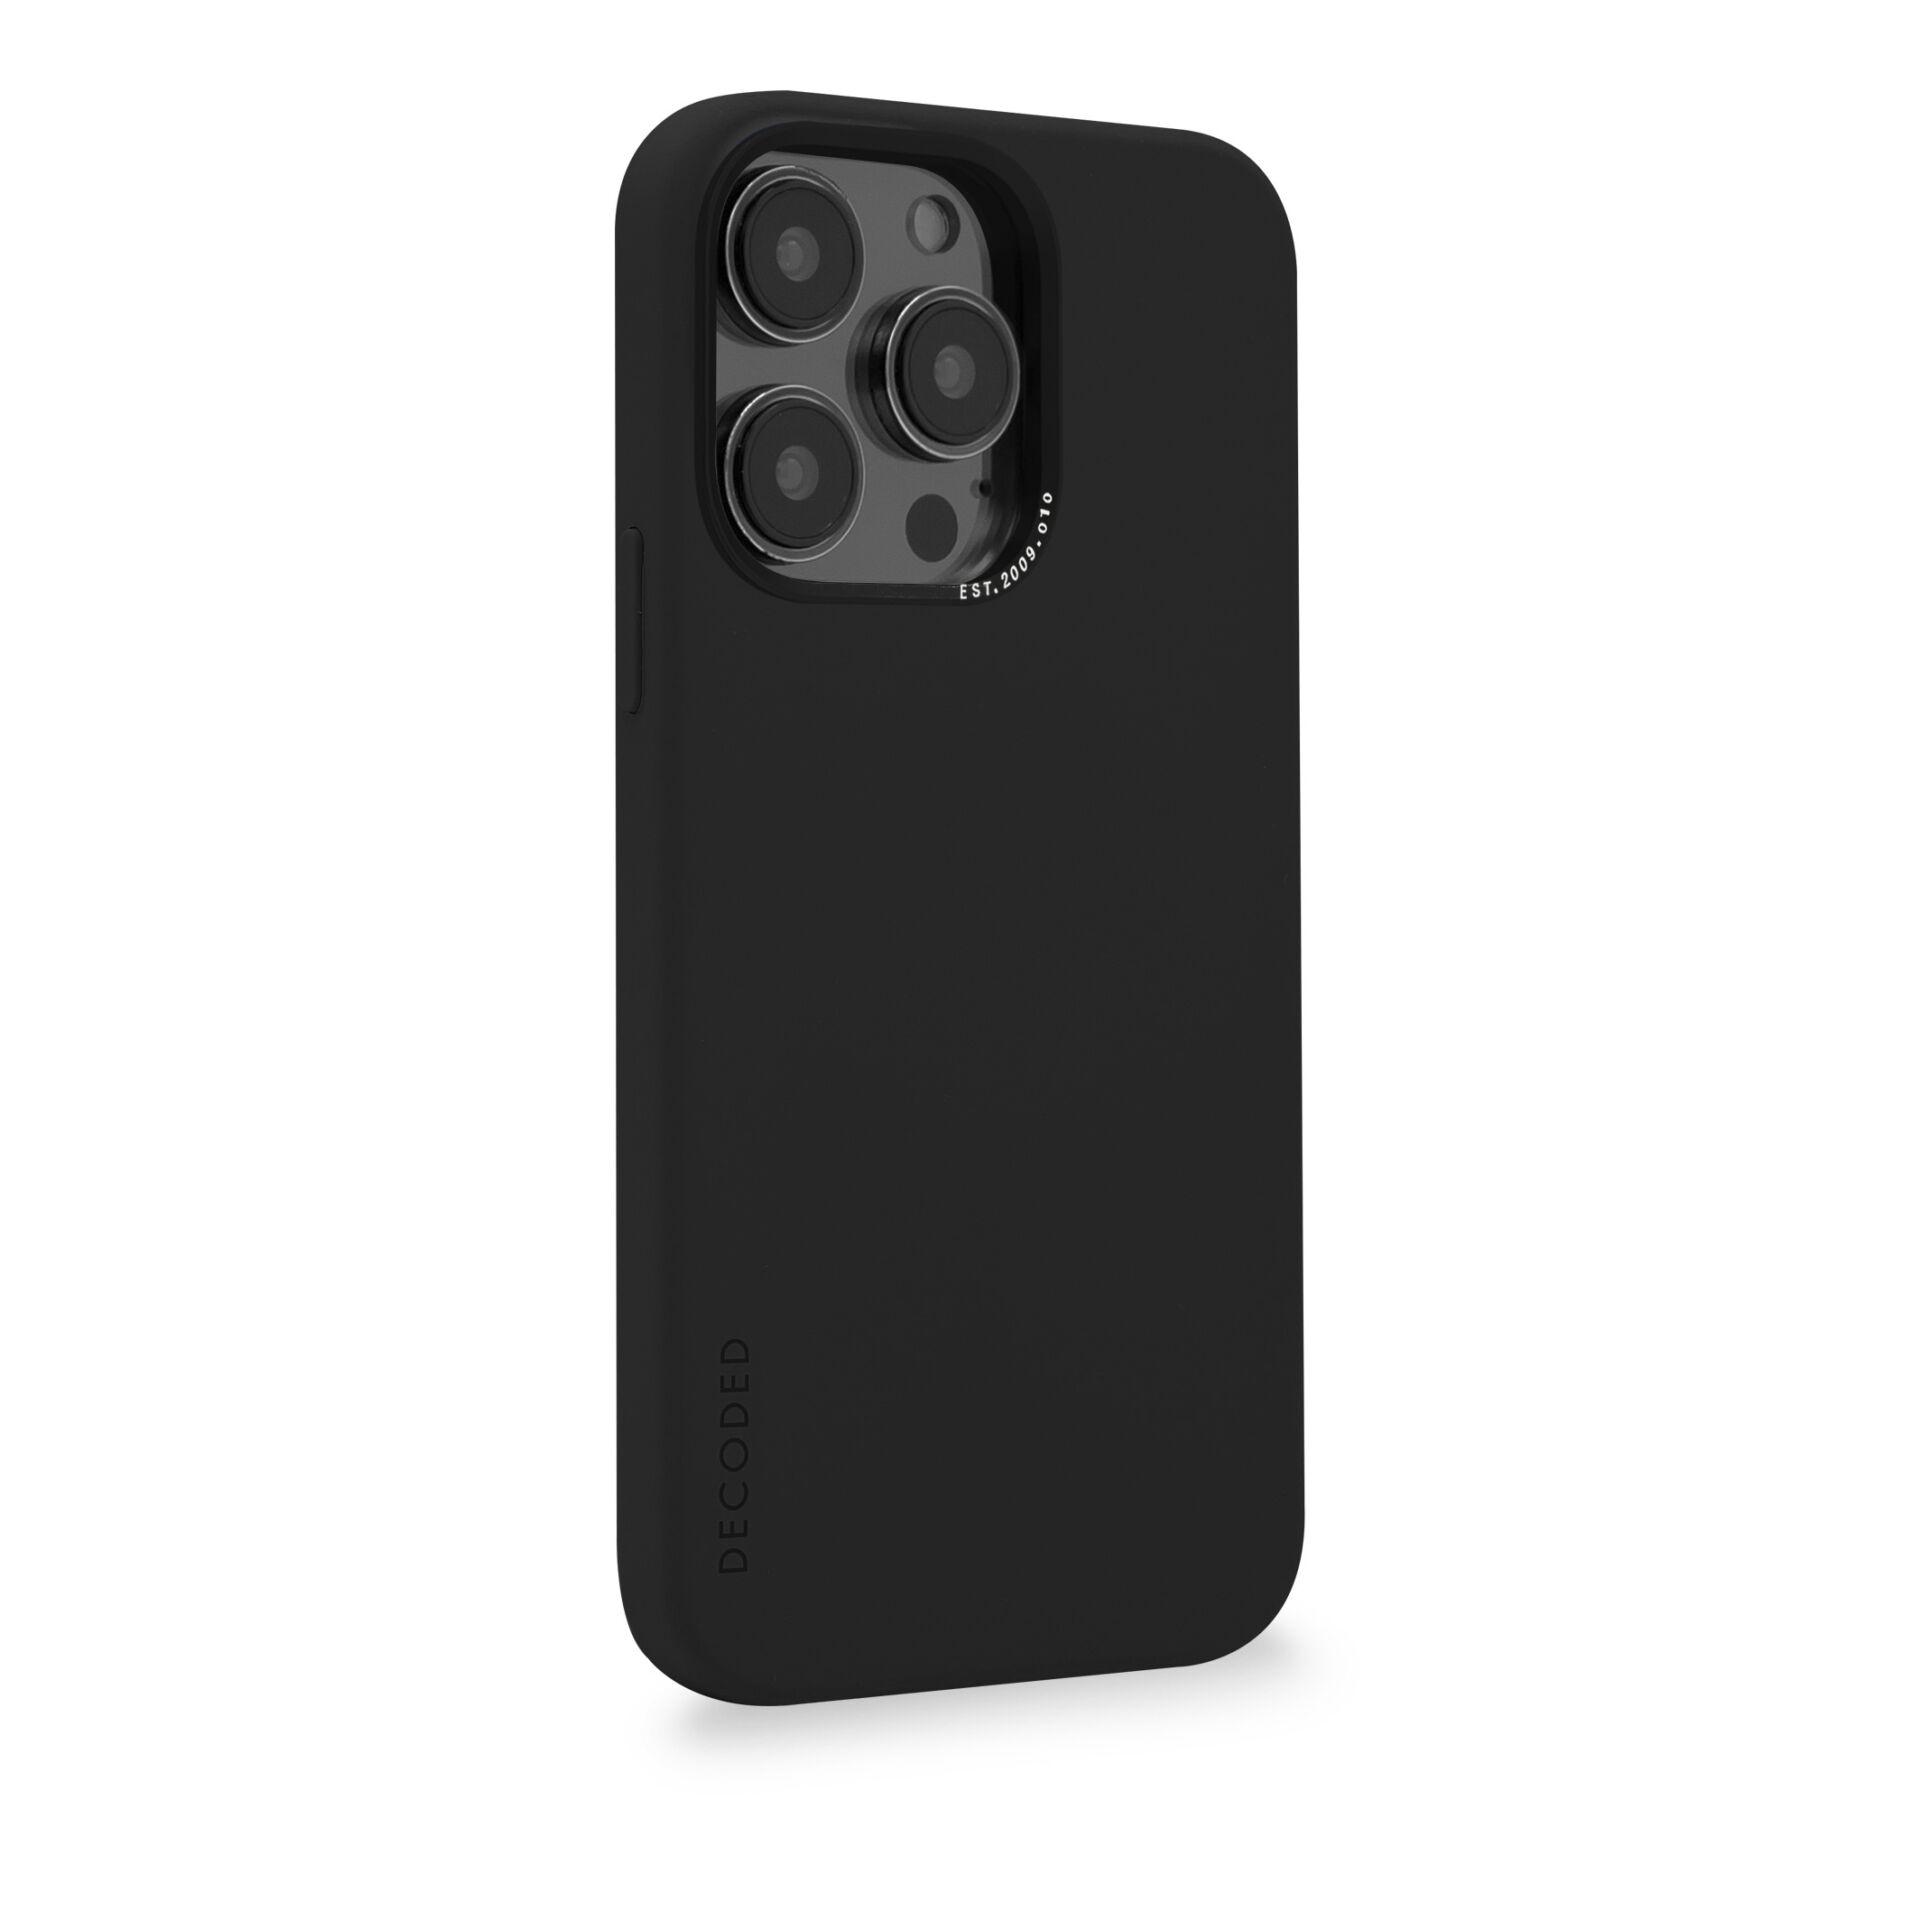 Charcoal Backcover, Charcoal, iPhone Pro 14 Apple, Backcover Silicone DECODED AntiMicrobial Max,